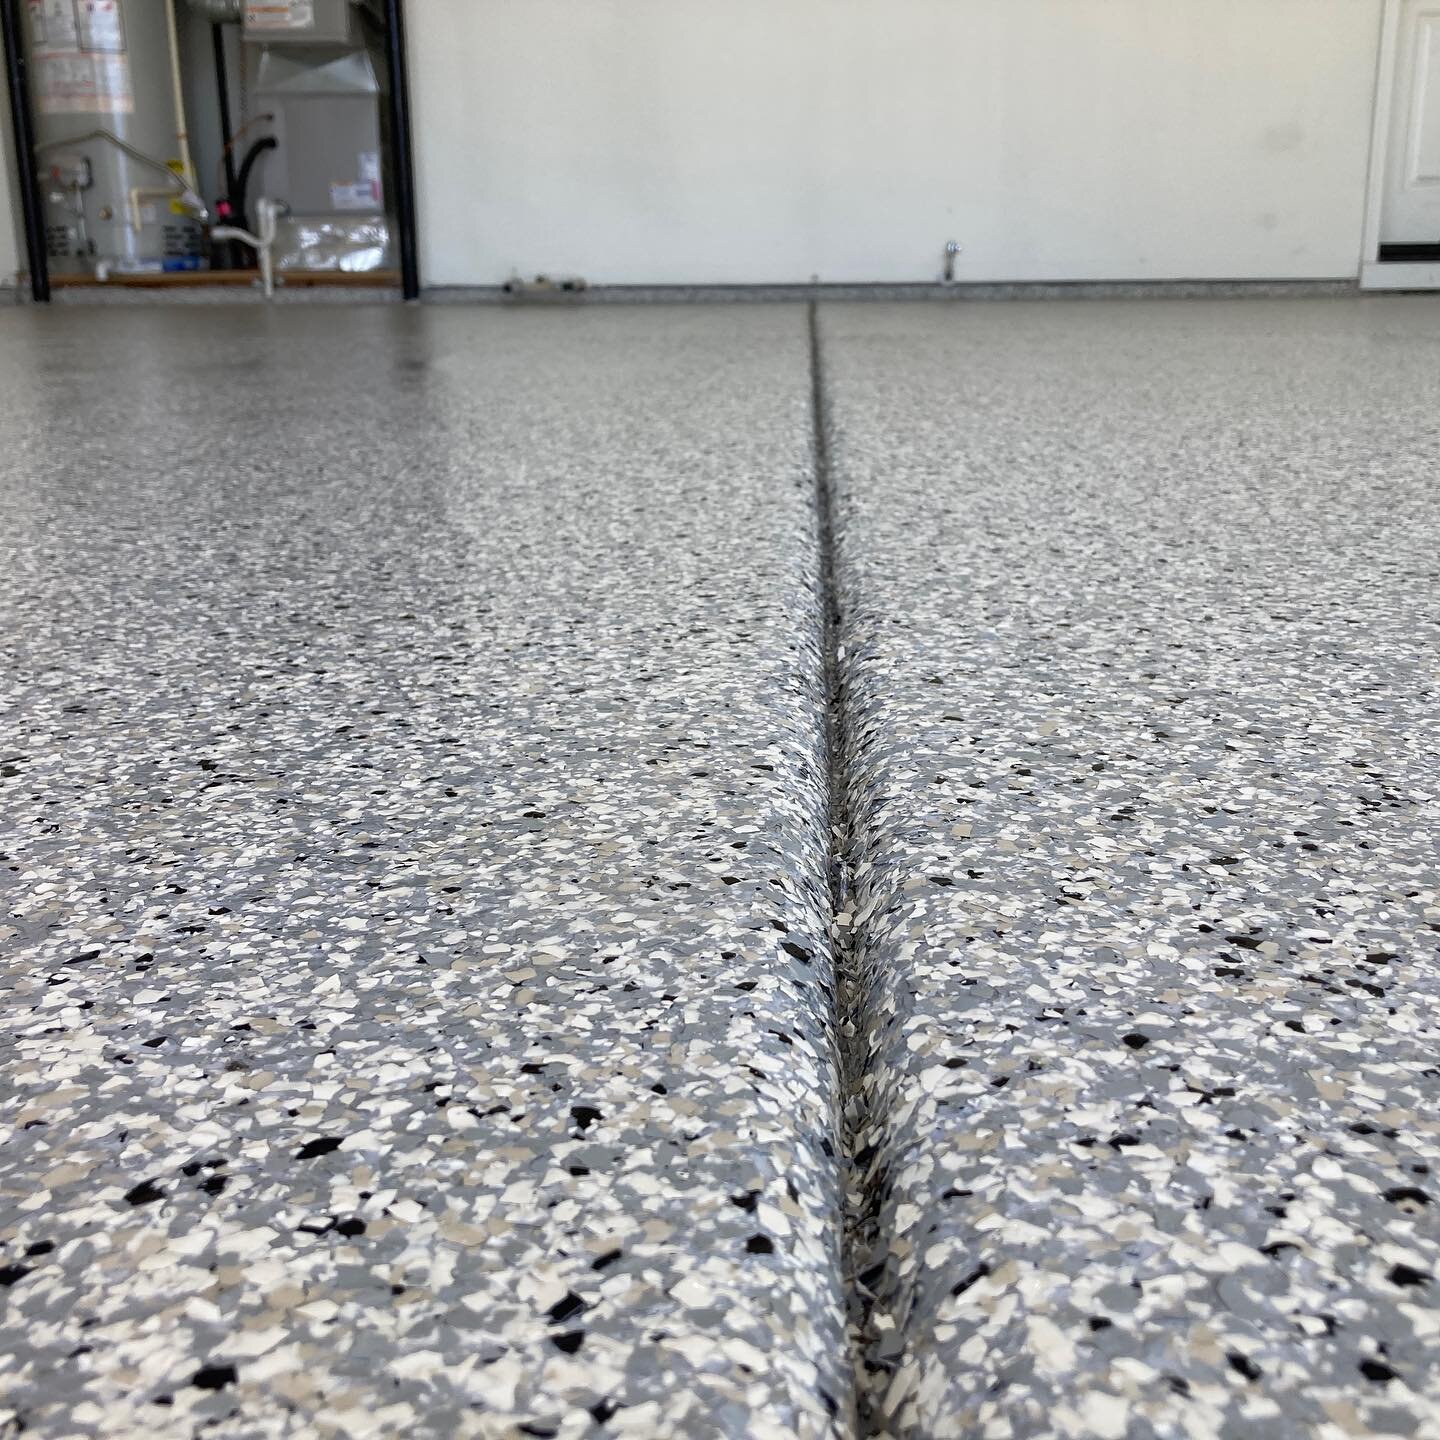 👏That. Is. A. Clean. Coating. 

😎 This customer is ready to roll into summer with a durable epoxy floor that creates a beautiful extension of their space. 

The specs:
👉Flake Epoxy System✨
👉Color: Granite 🪨
👉Always 💯 

Ready to create an exten